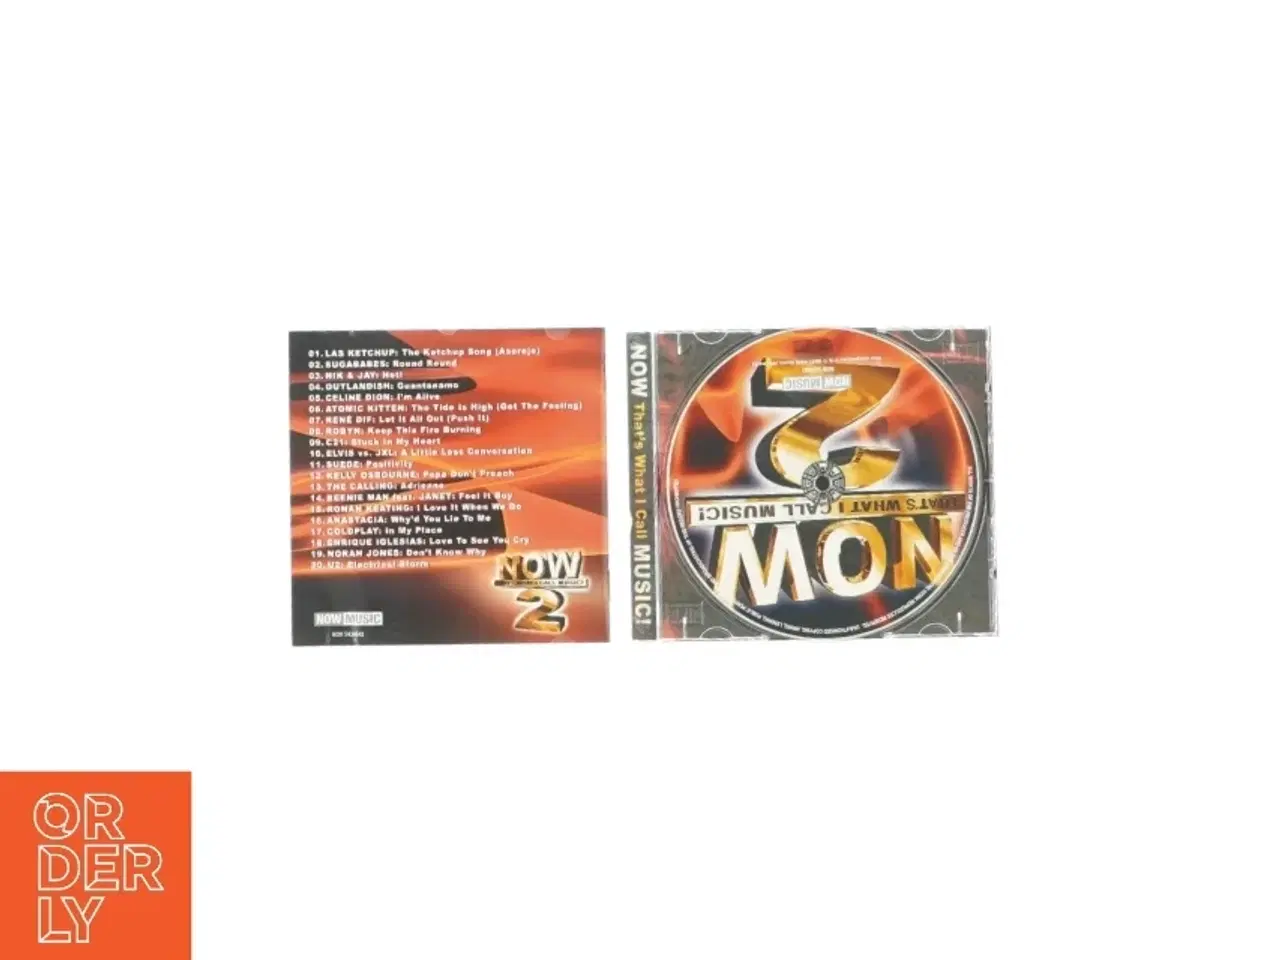 Billede 3 - Now thats what i call music 2 (cd)